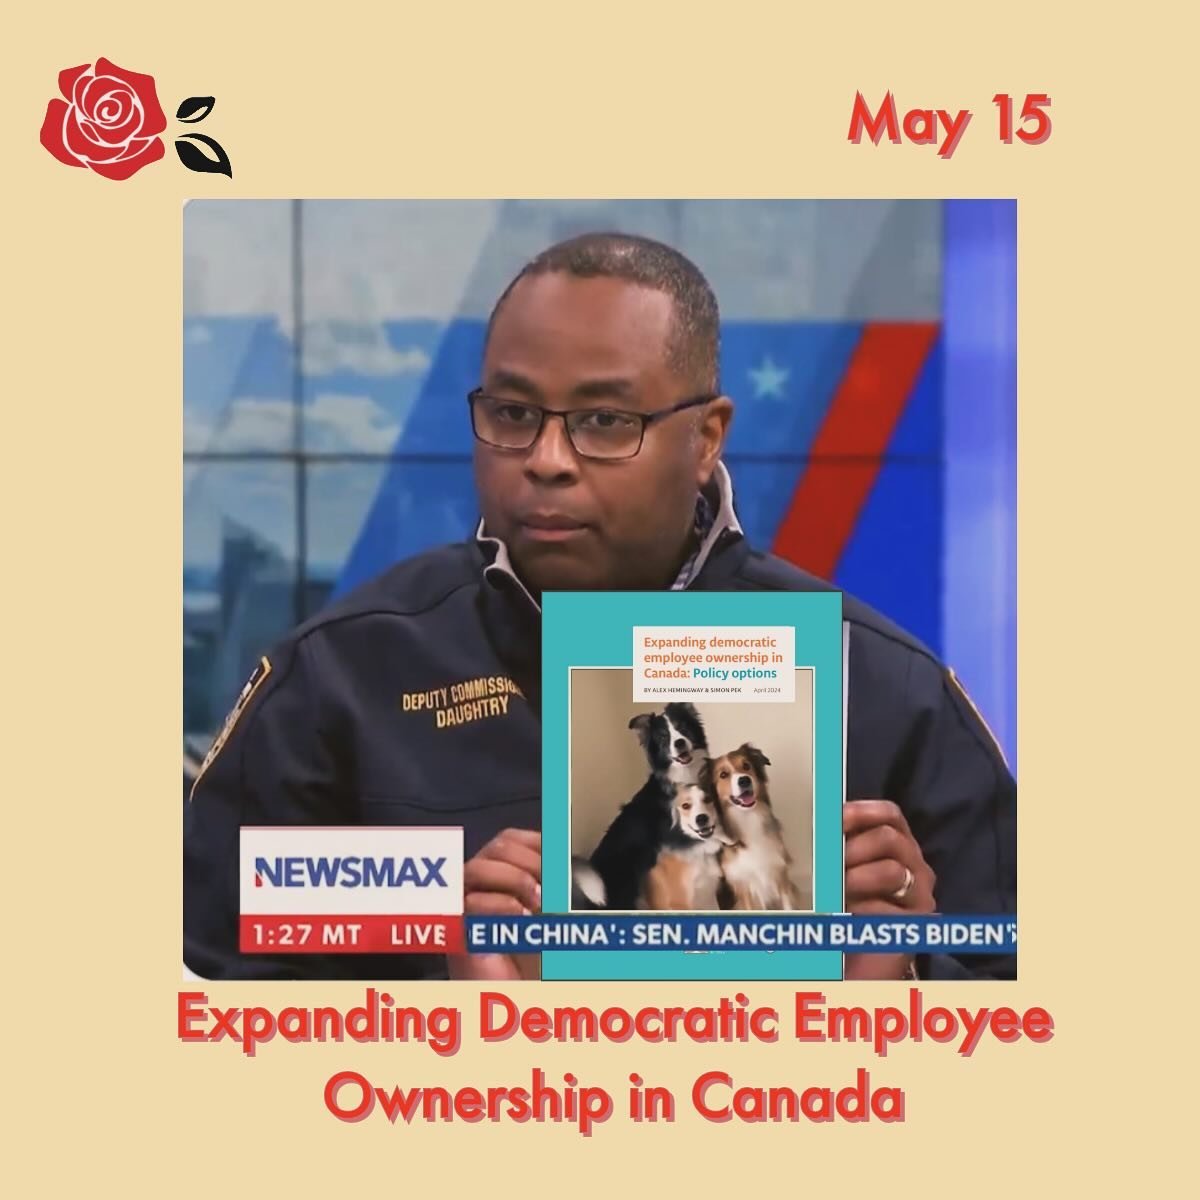 Book club is back next week with a discussion of CCPA paper &lsquo;Expanding Democratic Ownership in Canada&rsquo;

Meeting at the commercial drive legion 7pm all welcome

🍉⛓️&zwj;💥☀️ 🍉⛓️&zwj;💥☀️ 🍉⛓️&zwj;💥☀️